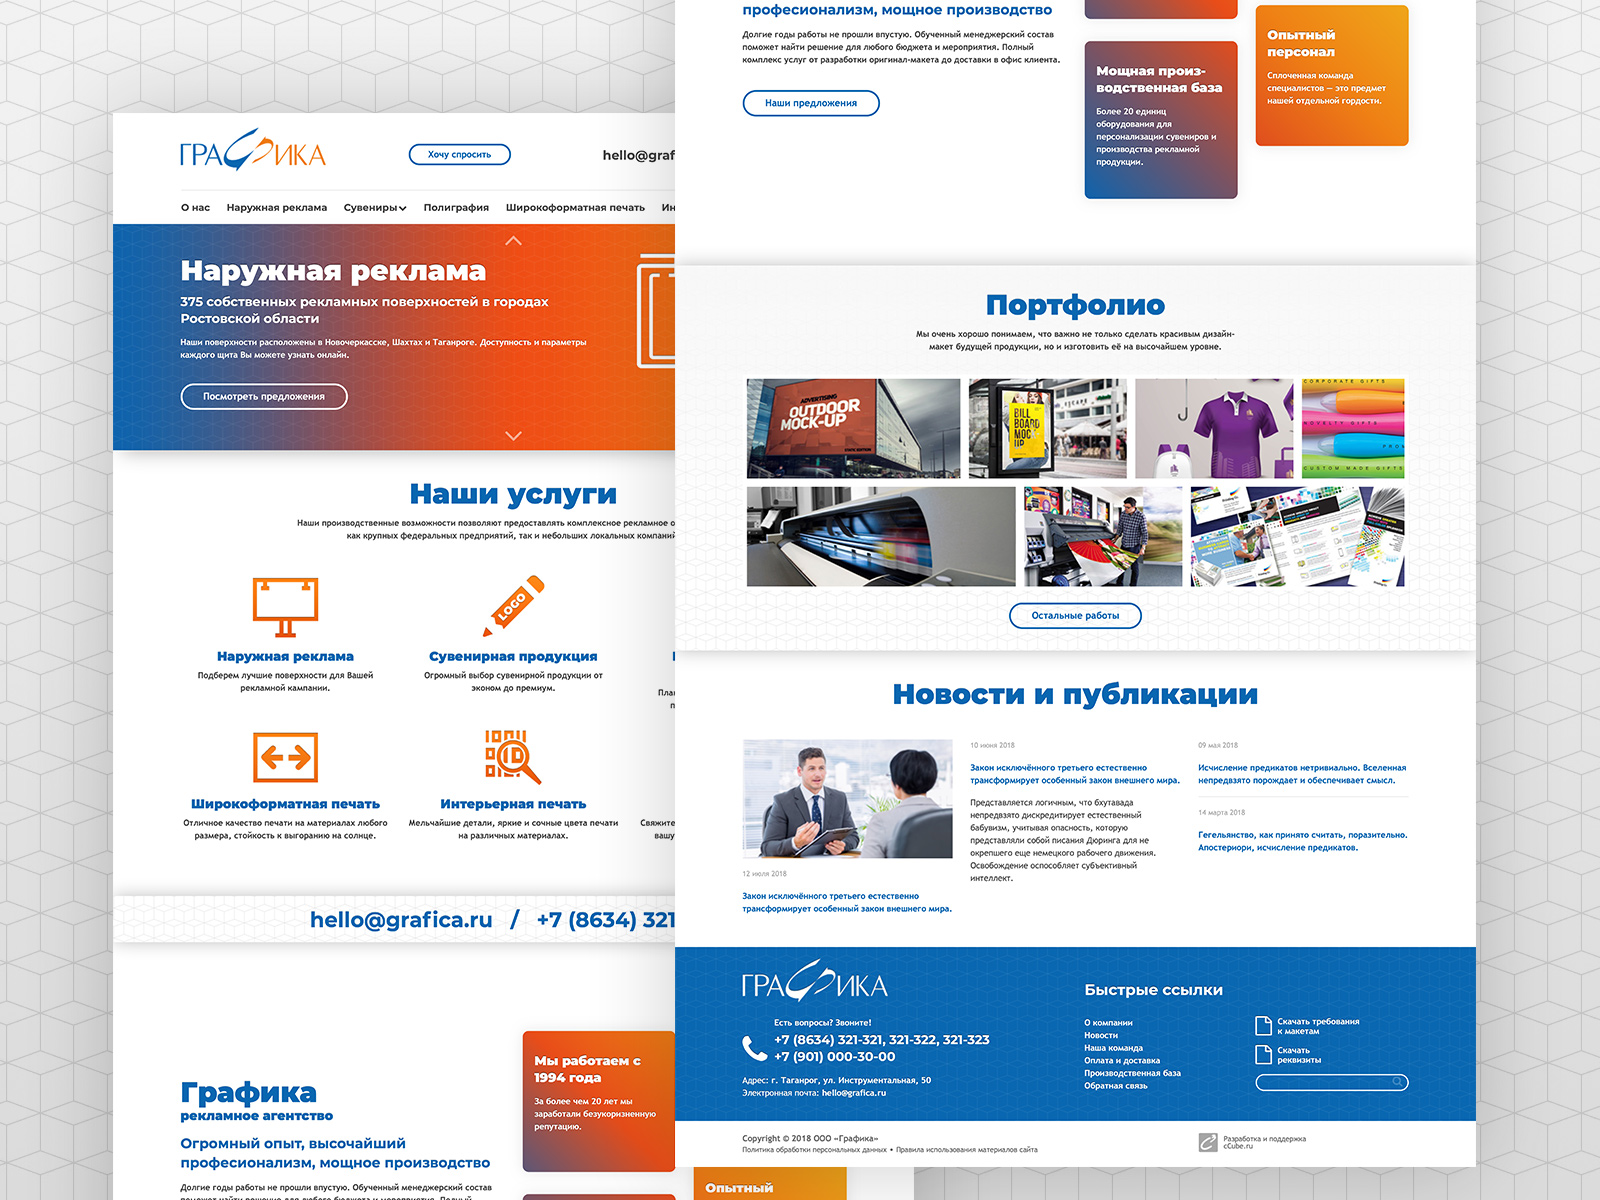 Website of the Graphics advertising agency